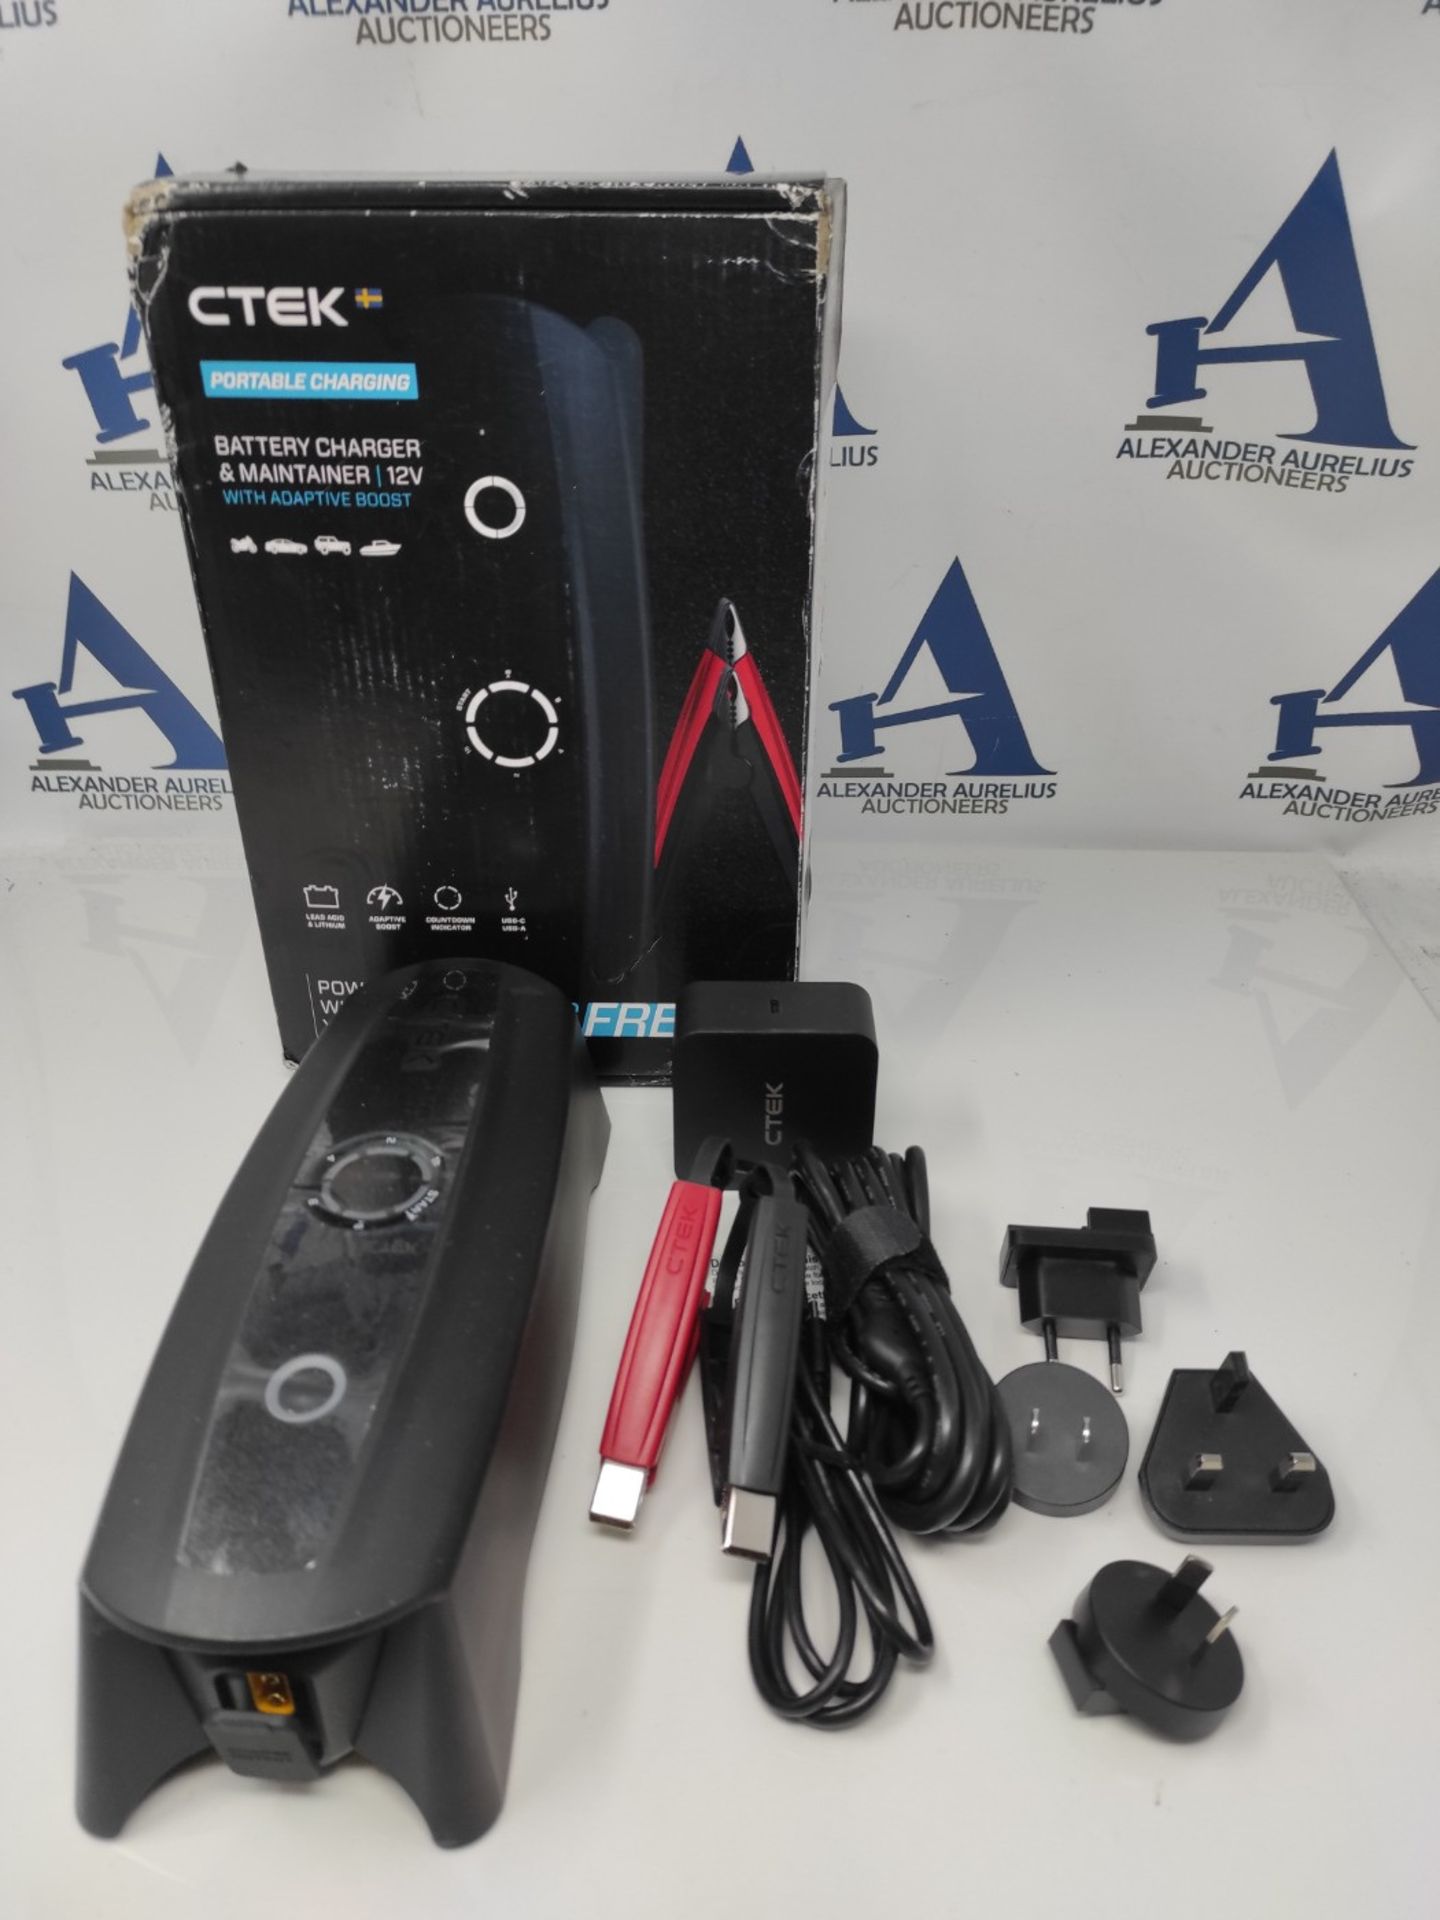 RRP £223.00 CTEK CS FREE, 12V Portable Battery Charger, 4-In-1 Charger Power Bank, Solar Power Ban - Image 2 of 2